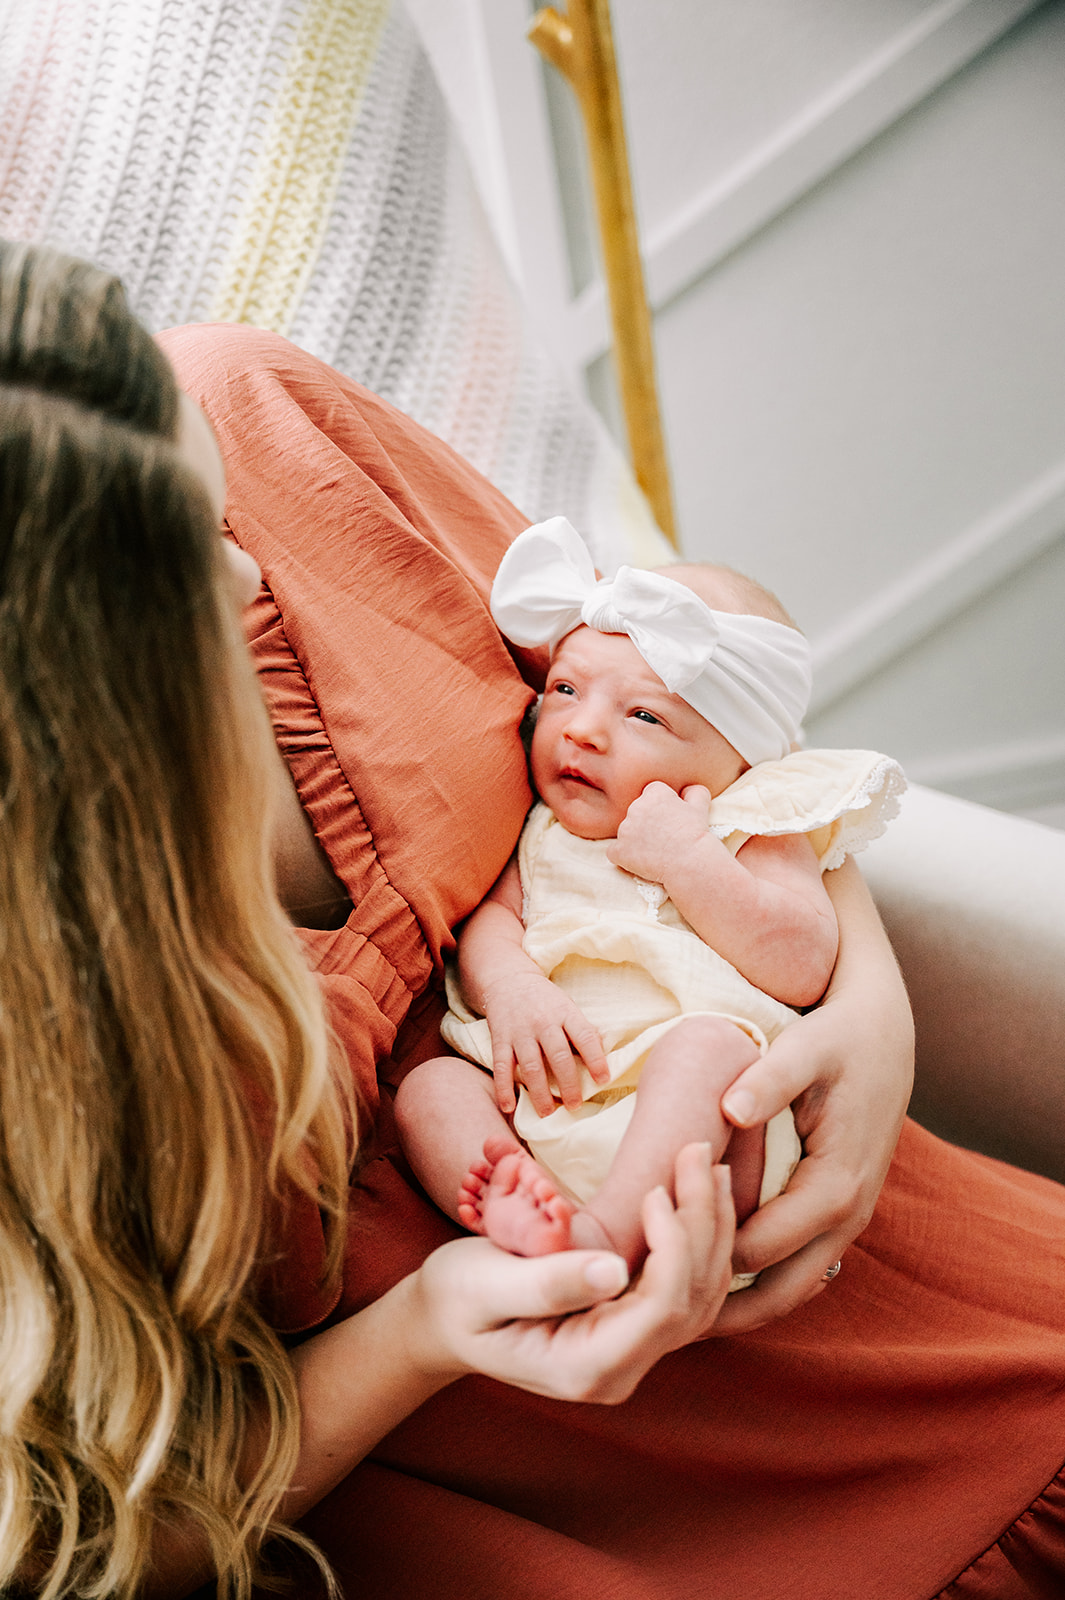 A new mother in a red dress holds her newborn baby girl in her lap while they both look at each other in front of a window Chapel Hill Pediatrics